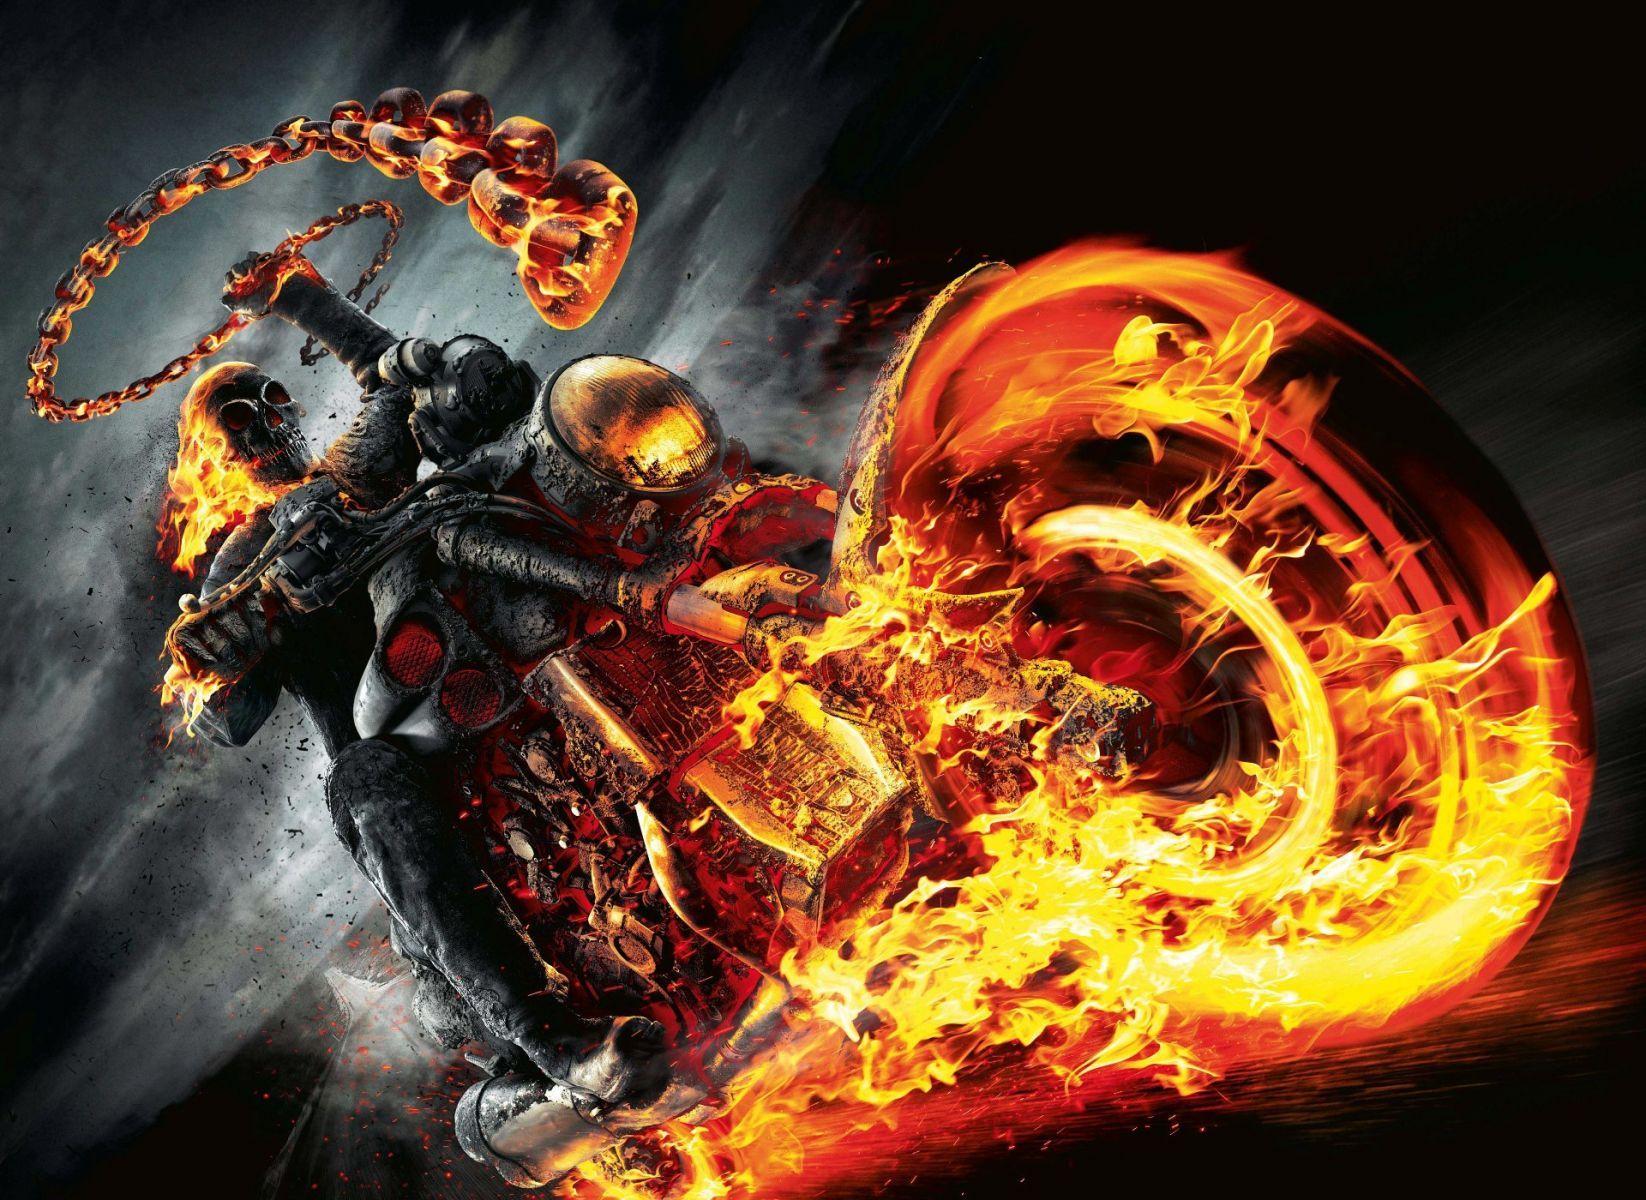 Ghost Rider Wallpaper. HD 3D and Abstract Wallpaper for Mobile